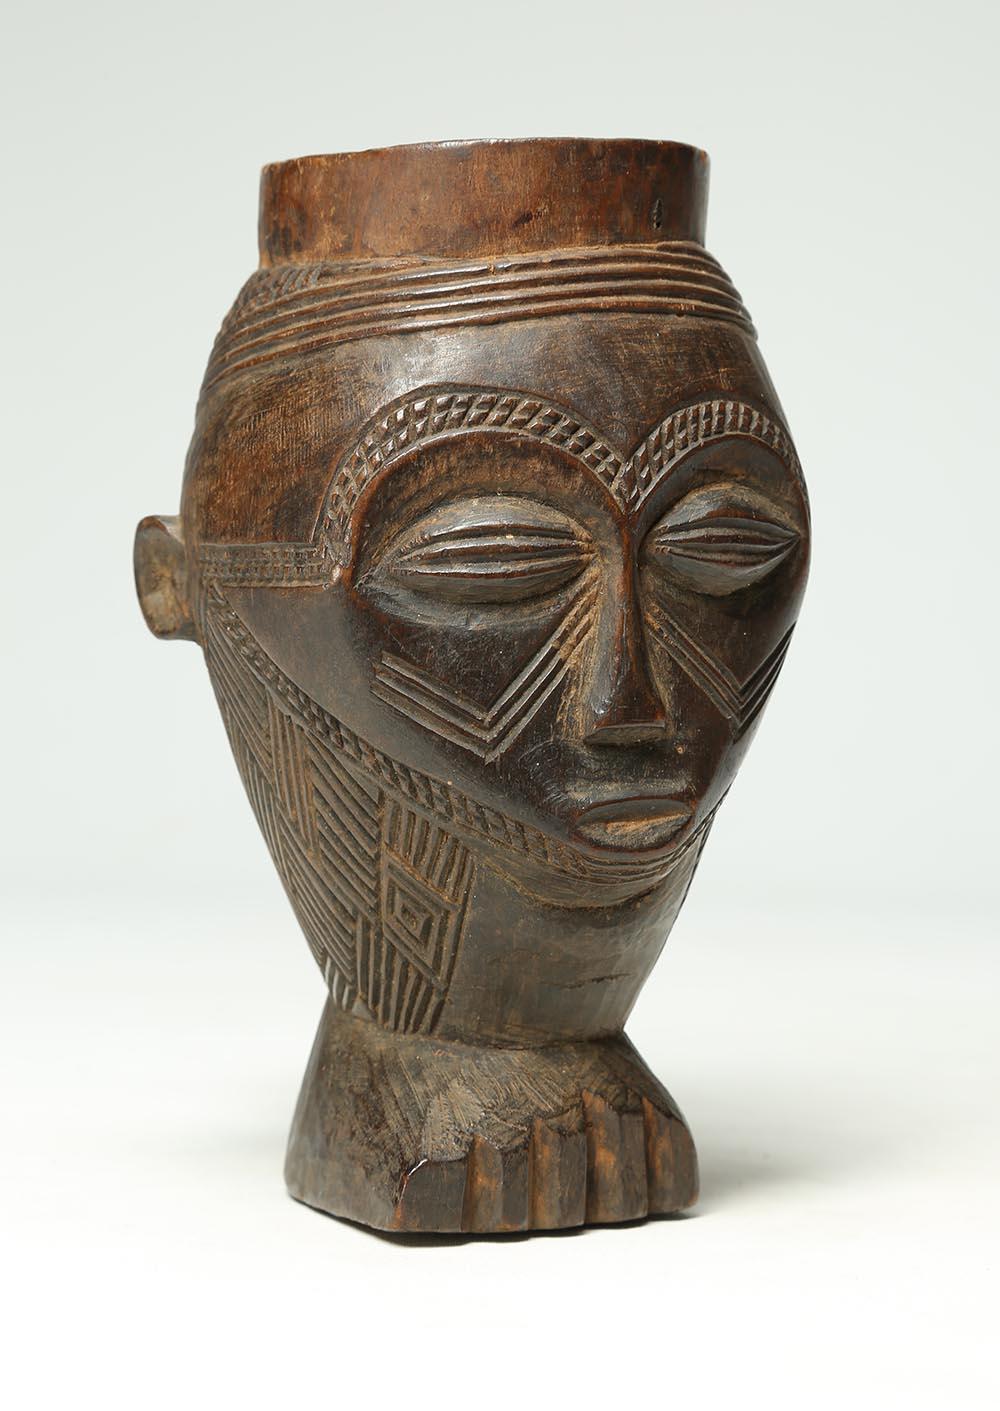 Finely carved wood Kuba cup with expressive face, carefully carved geometric design on the eyebrows and chin, scarification lines across chips. Heavy wear and patina from native use, standing on a carved foot. Early 20th century, Kuba Kingdom,